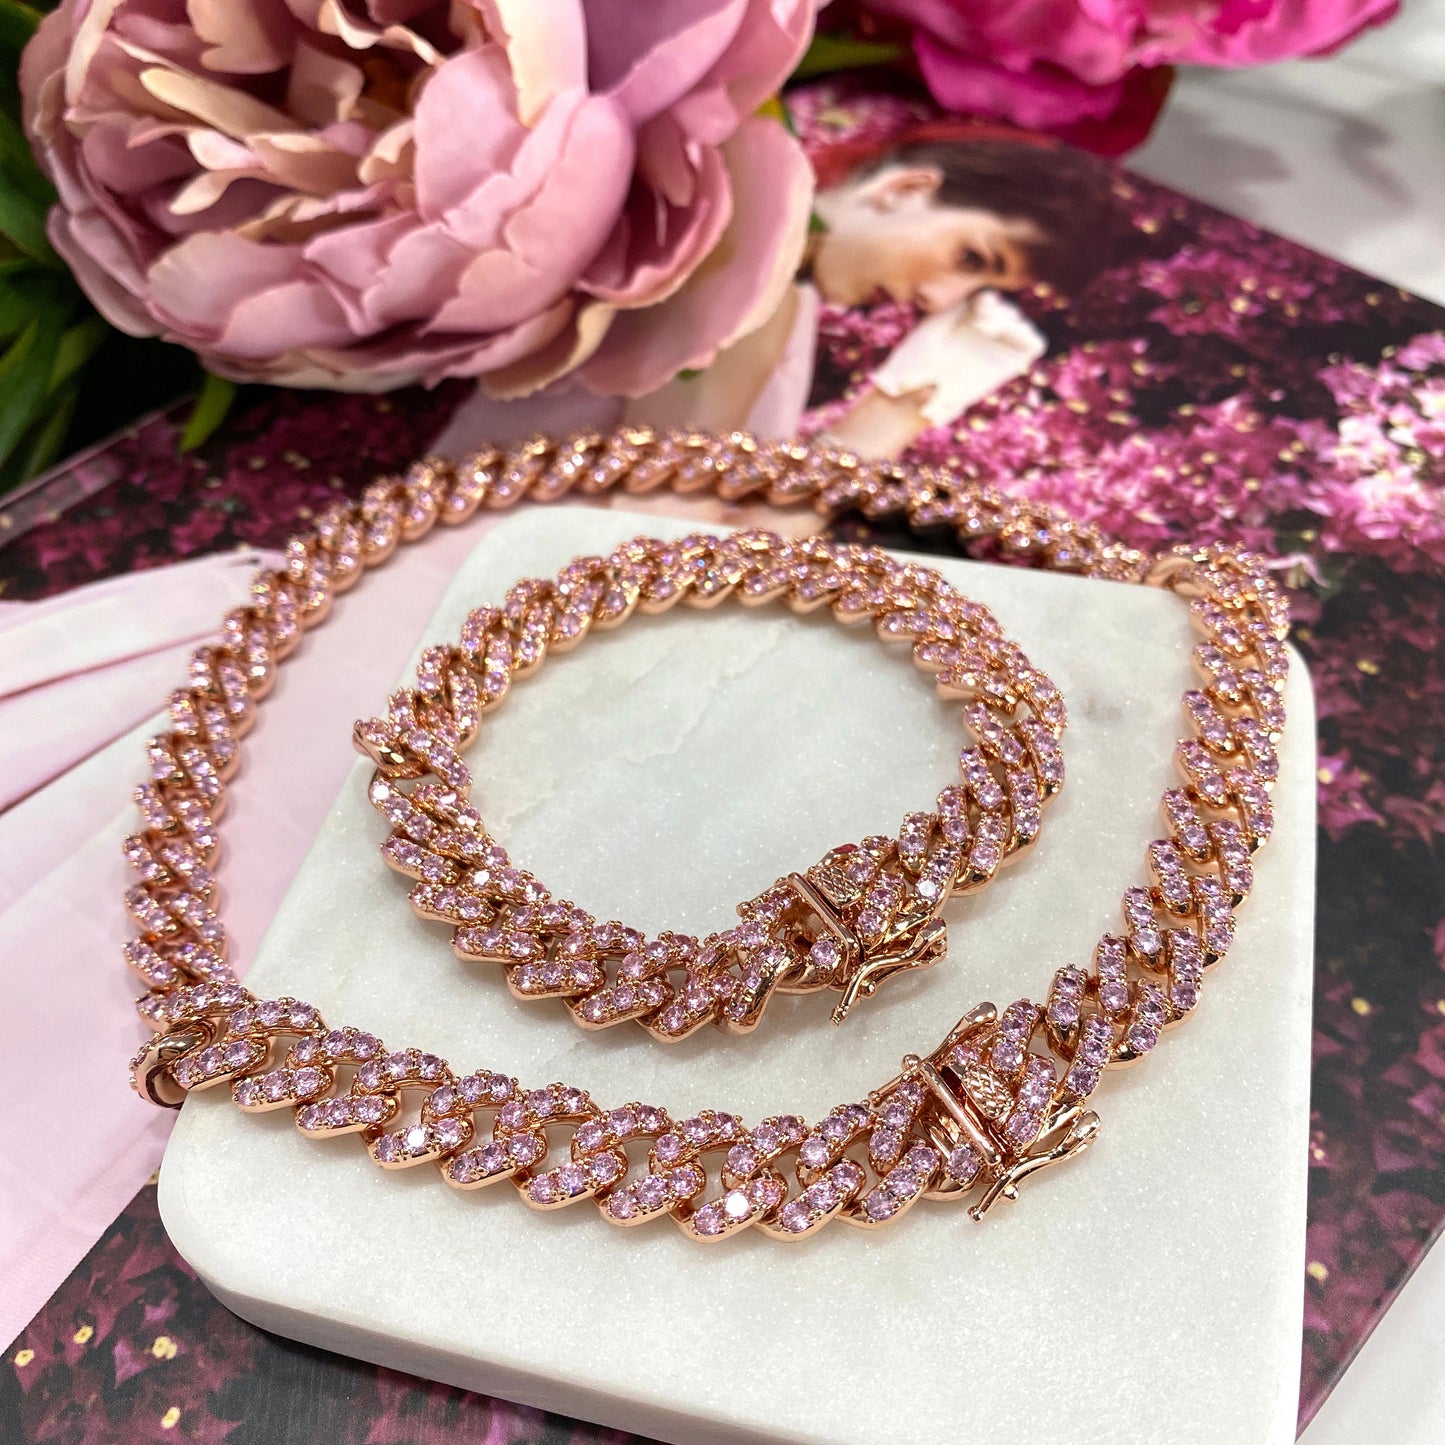 14K Rose Gold Filled 10mm Iced Miami Cuban Chain Featuring Double Safety Lock Box Cubic Zirconia, Chain or Bracelet, Wholesale Jewelry